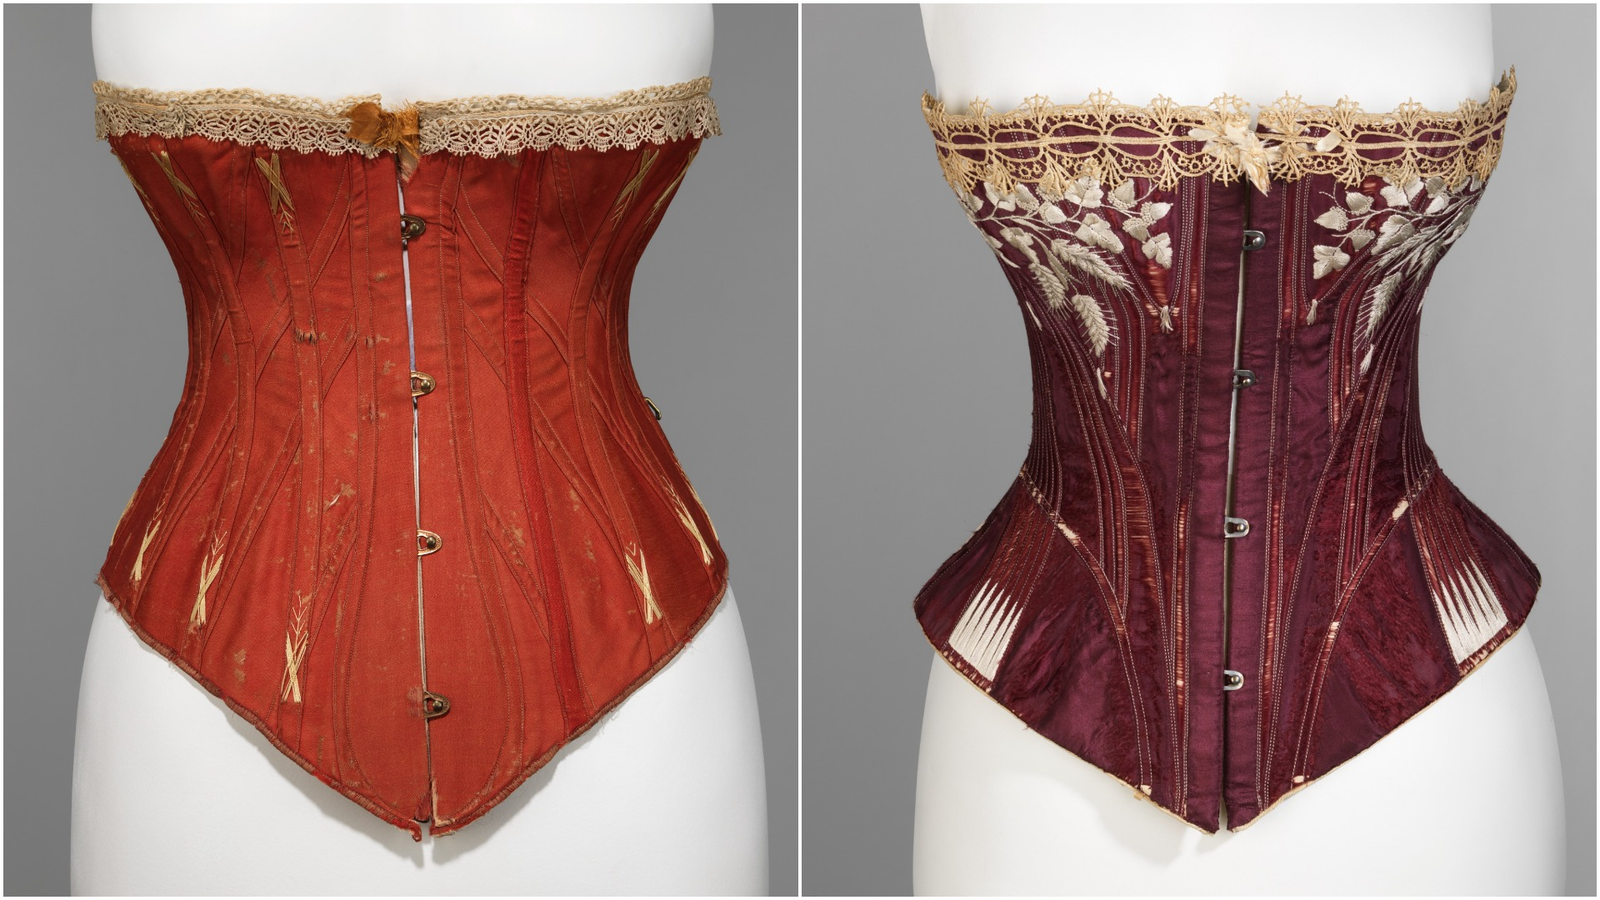 Victorian Era Undergarments Facts. Types & Designs for Men and Women